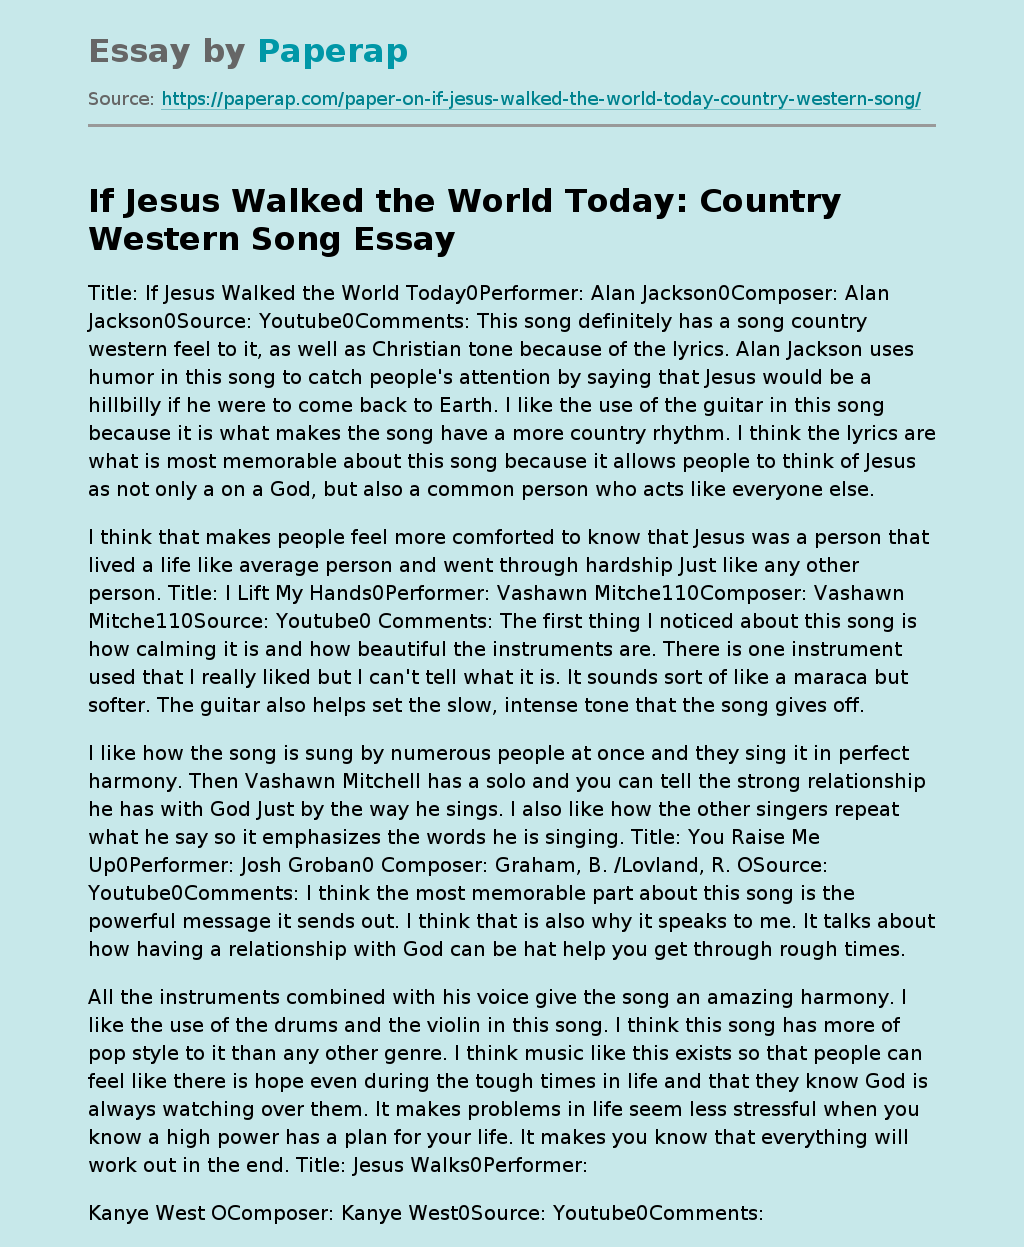 If Jesus Walked the World Today: Country Western Song